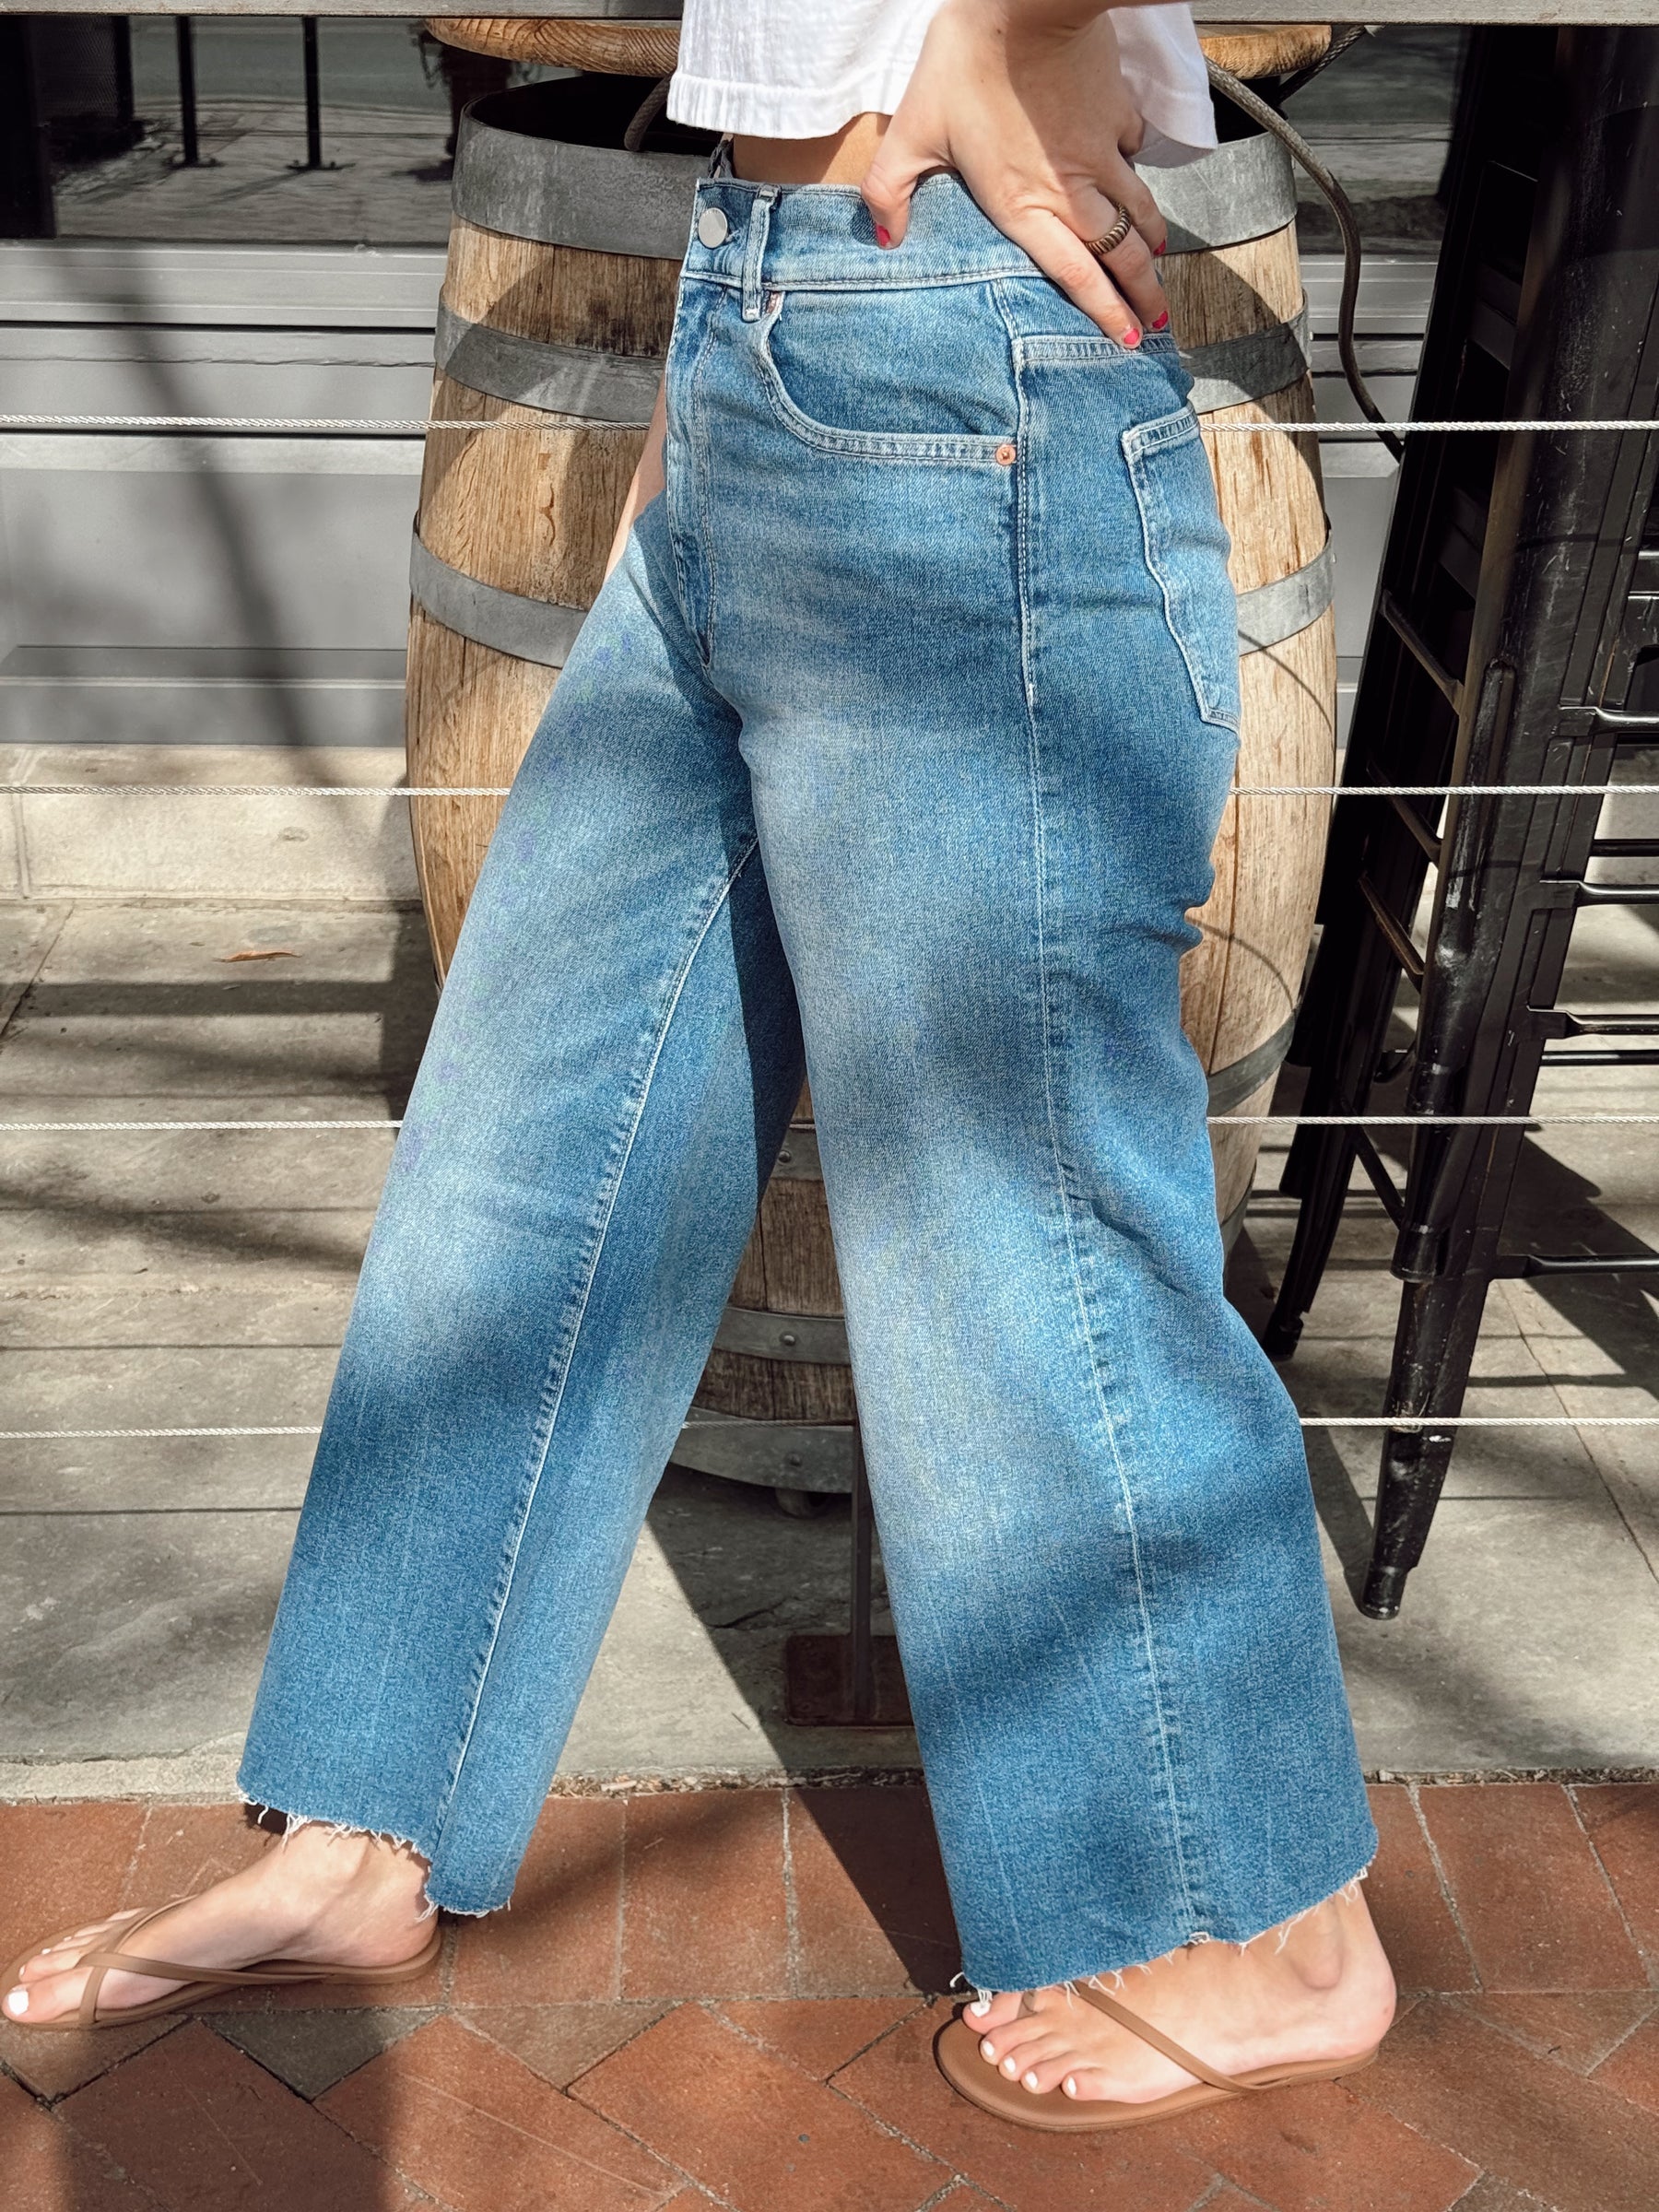 Maxwell James – Maxwell James Jeans